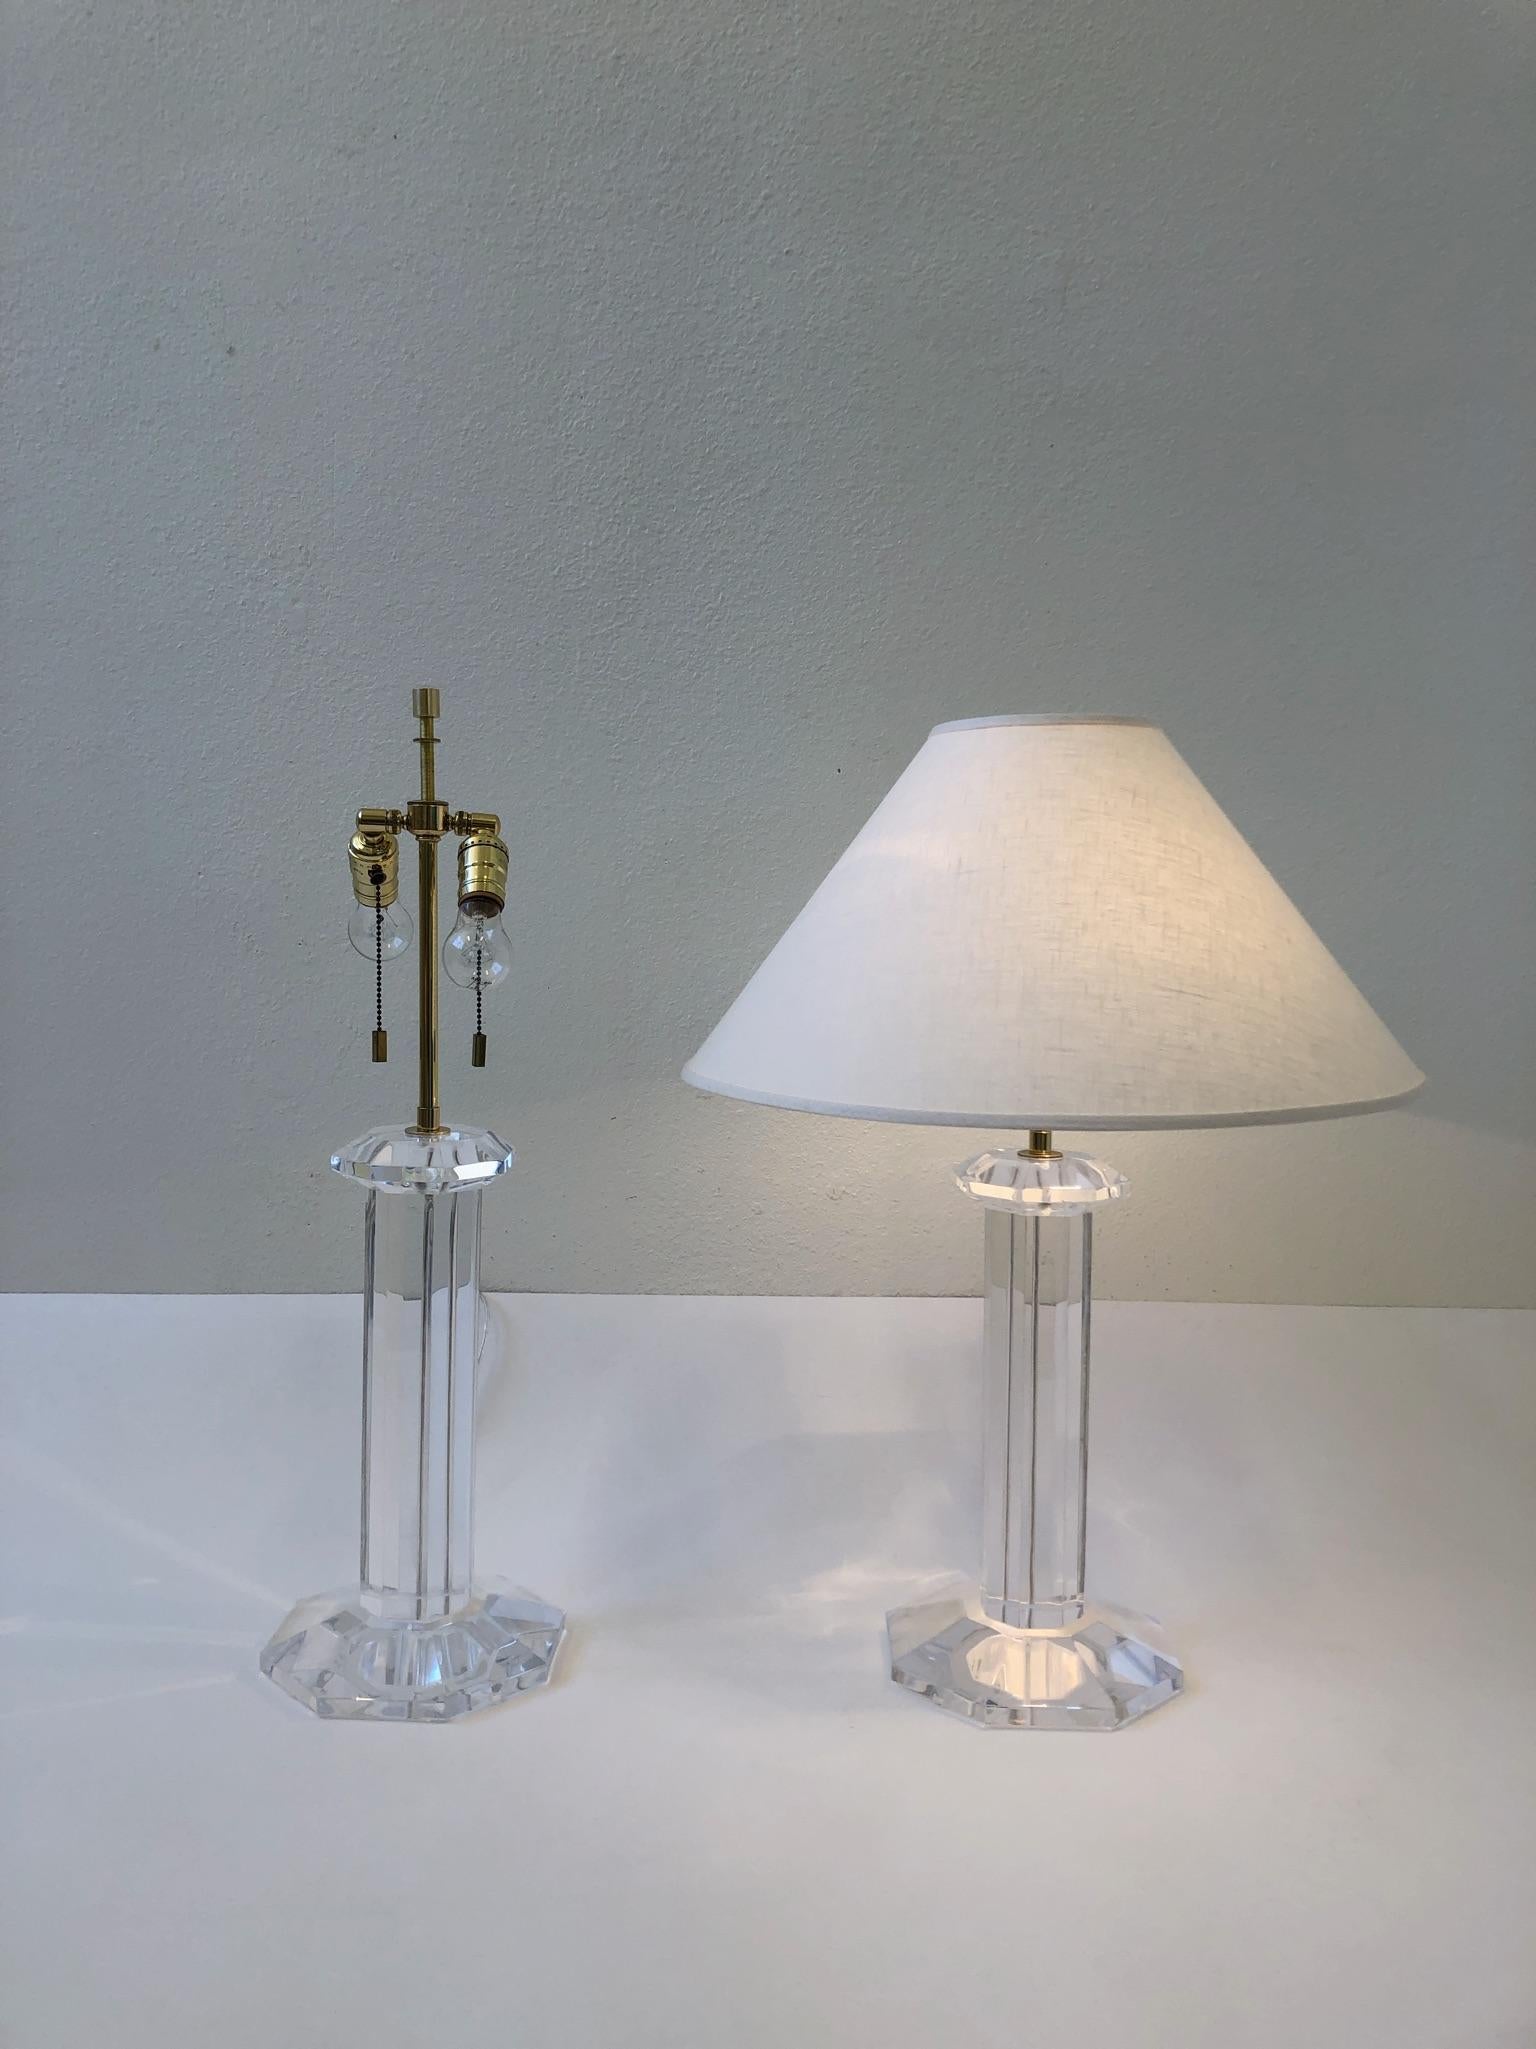 A glamorous pair of octagonal shape, clear lucite and polish brass table lamps. Design by Karl Springer in the 1980s. The lamps have been newly professionally polished and rewired with new vanilla linen shades.
The lamps have minor crazing on the